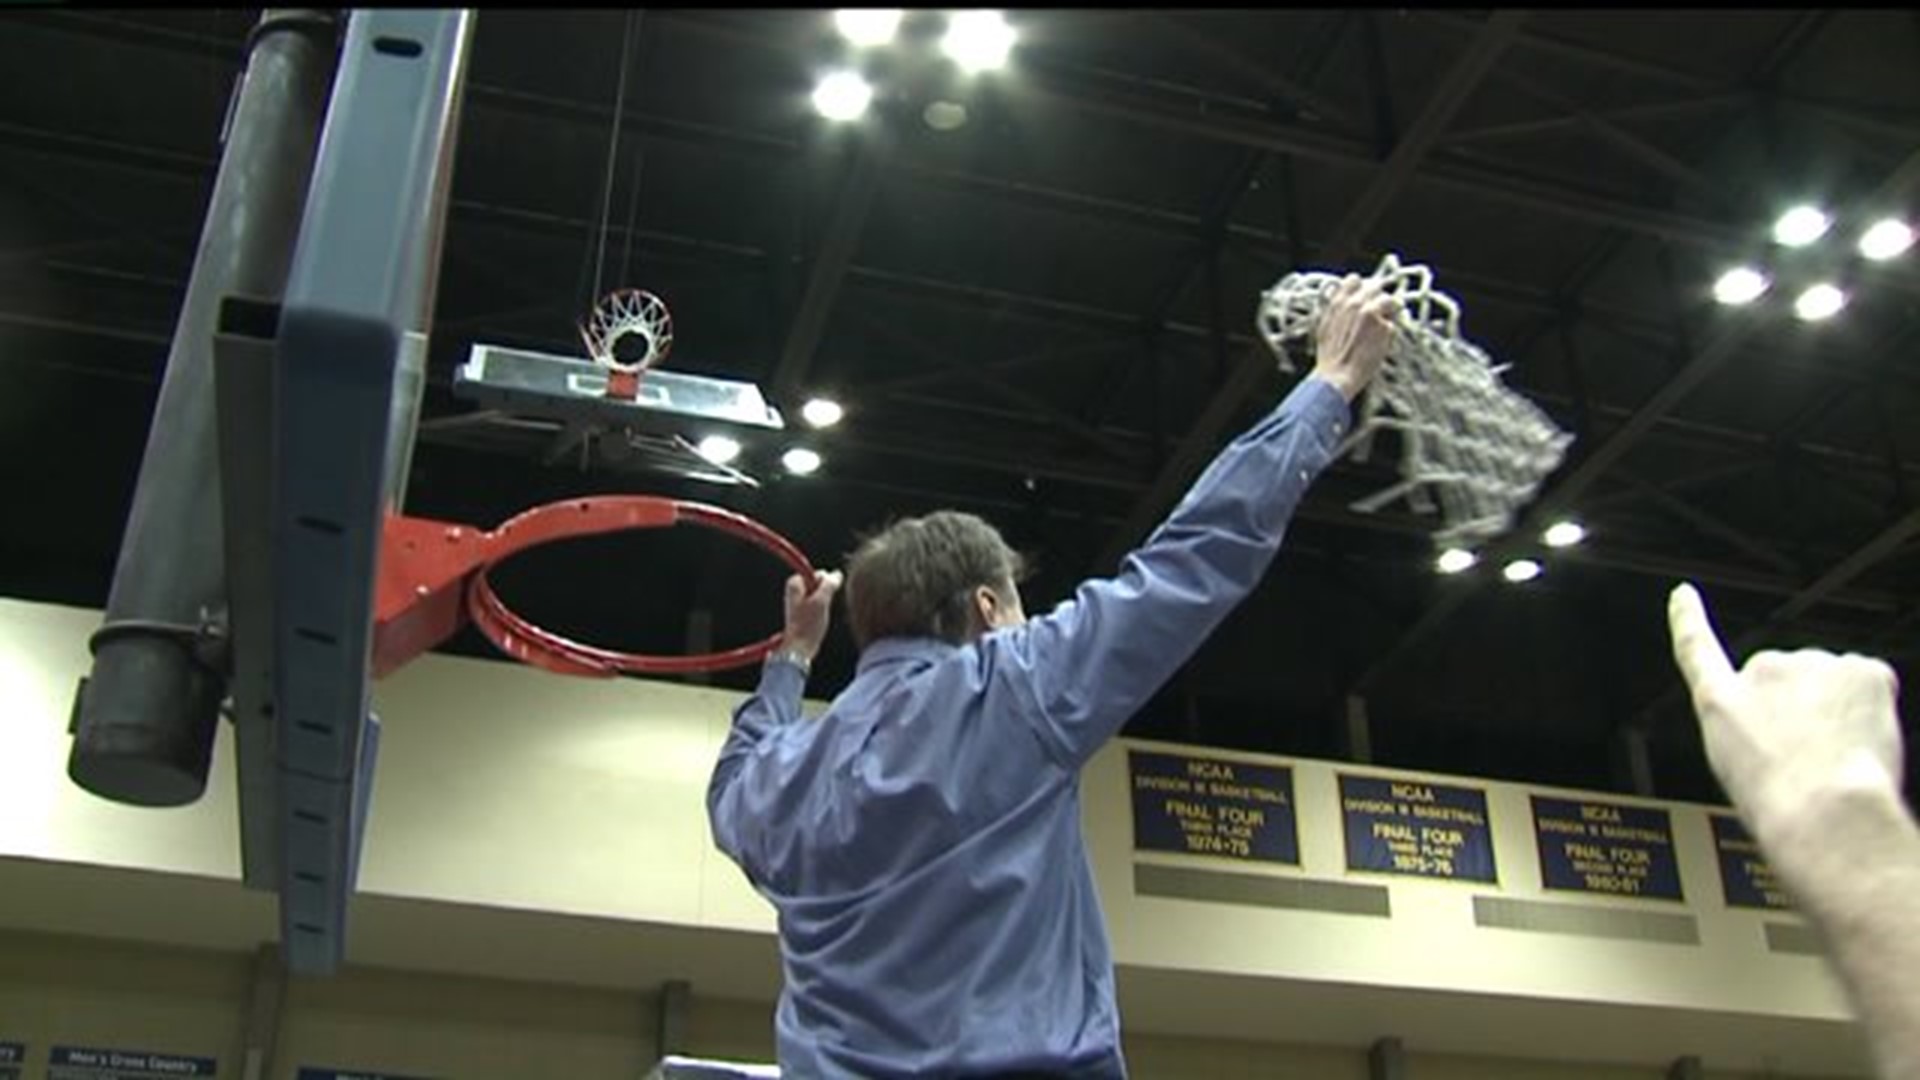 Augie headed to final four